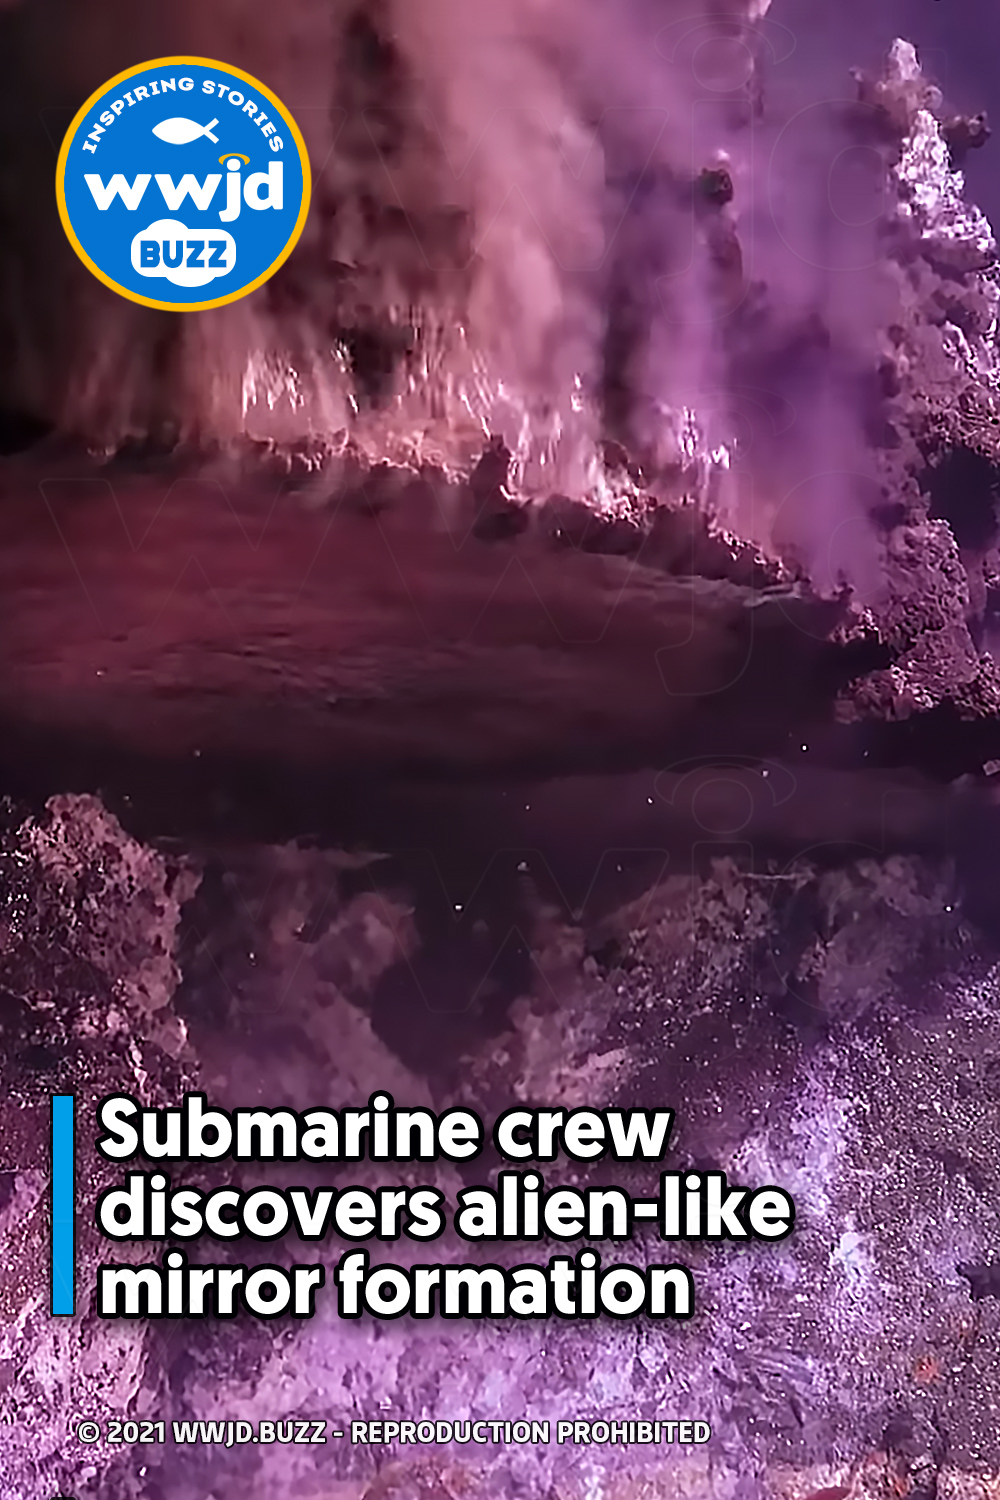 Submarine crew discovers alien-like mirror formation